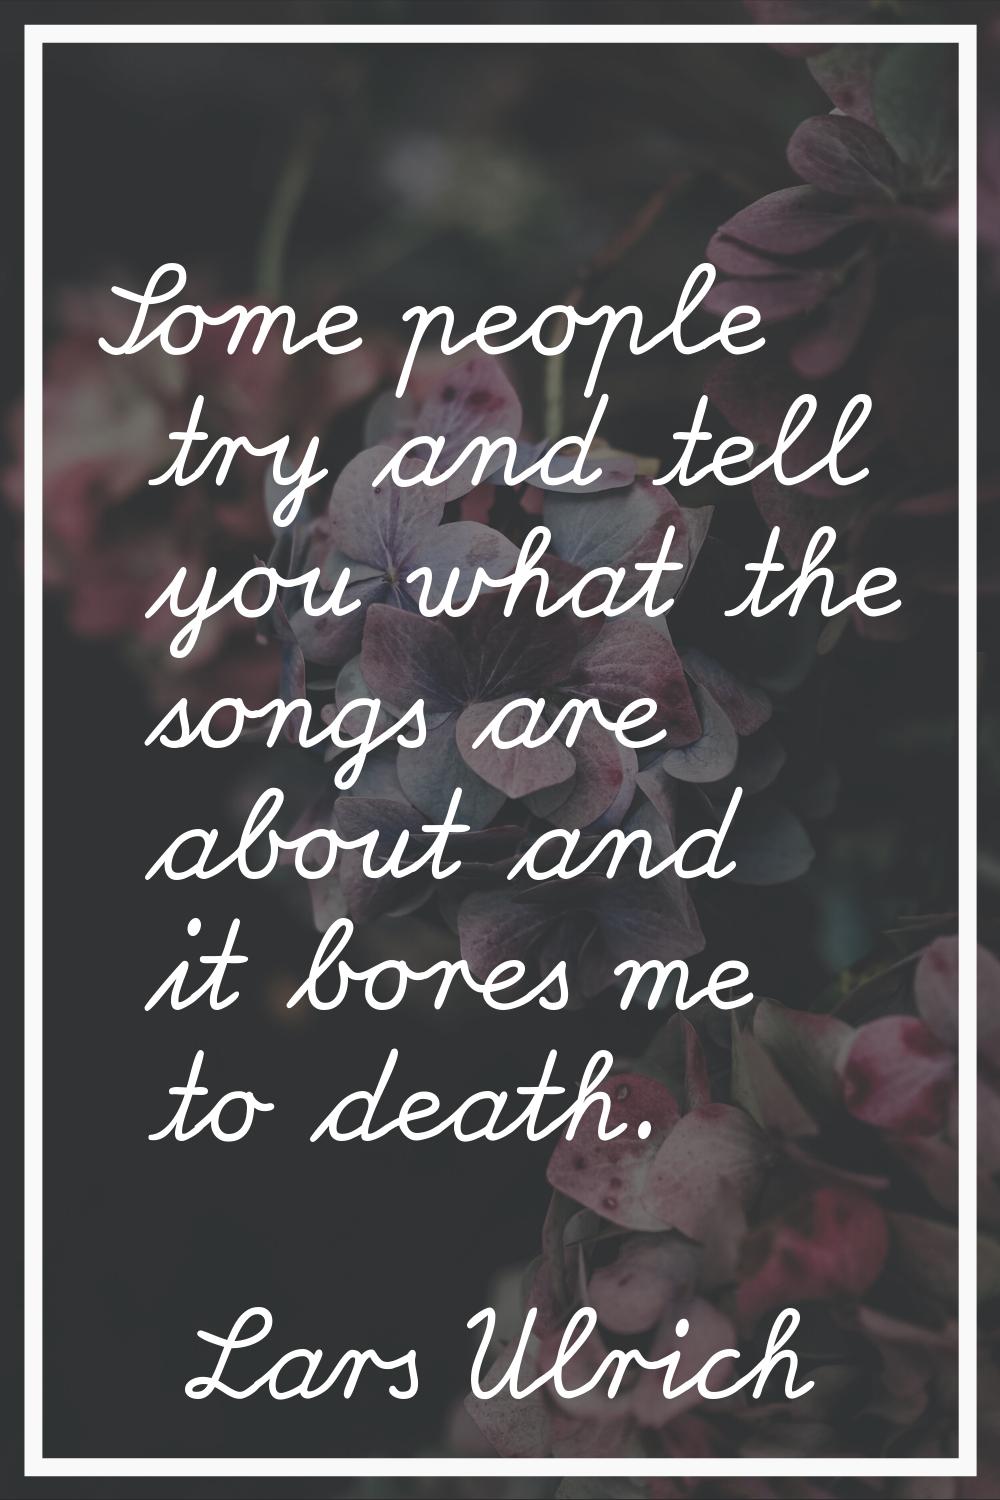 Some people try and tell you what the songs are about and it bores me to death.